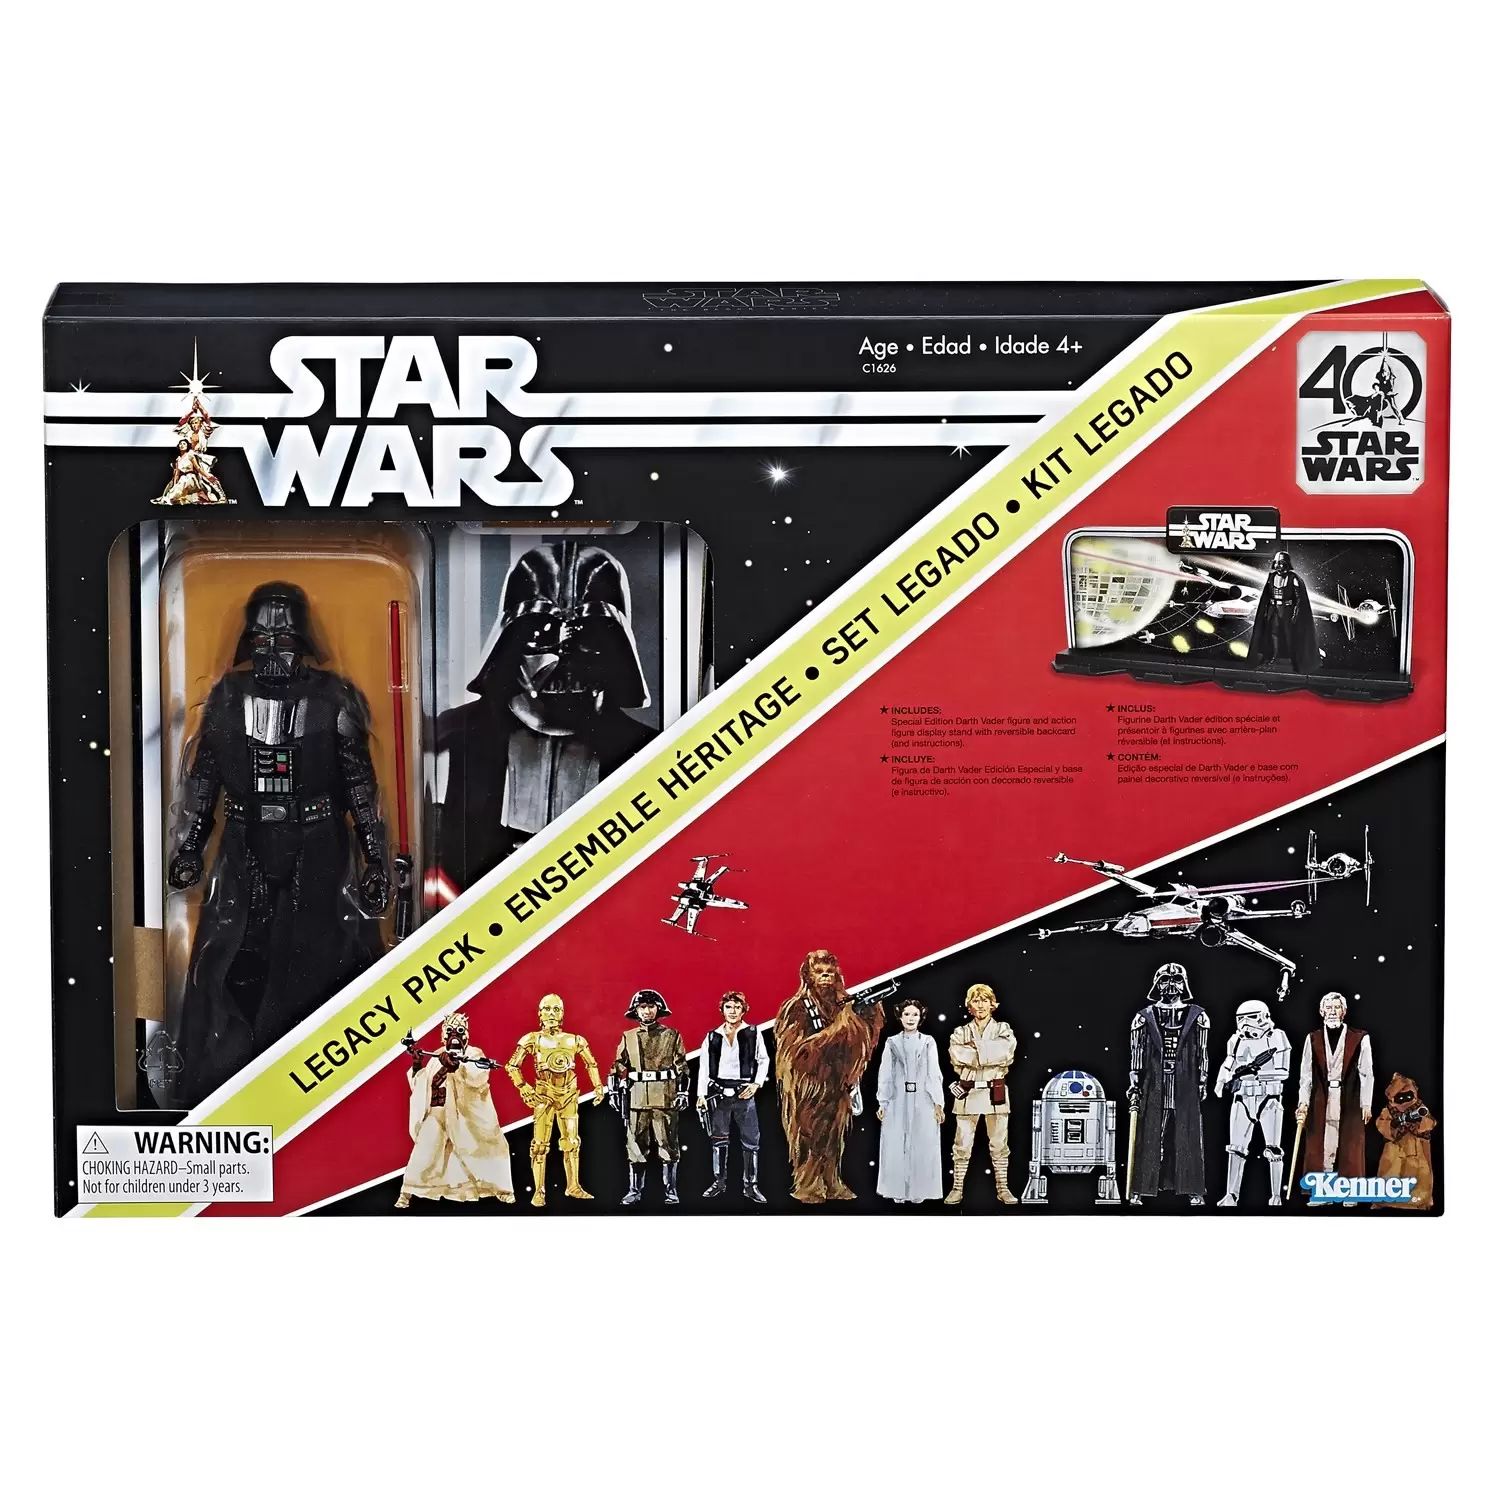 Black Series Star Wars ANH - 6 inches - Legacy Pack including Darth Vader